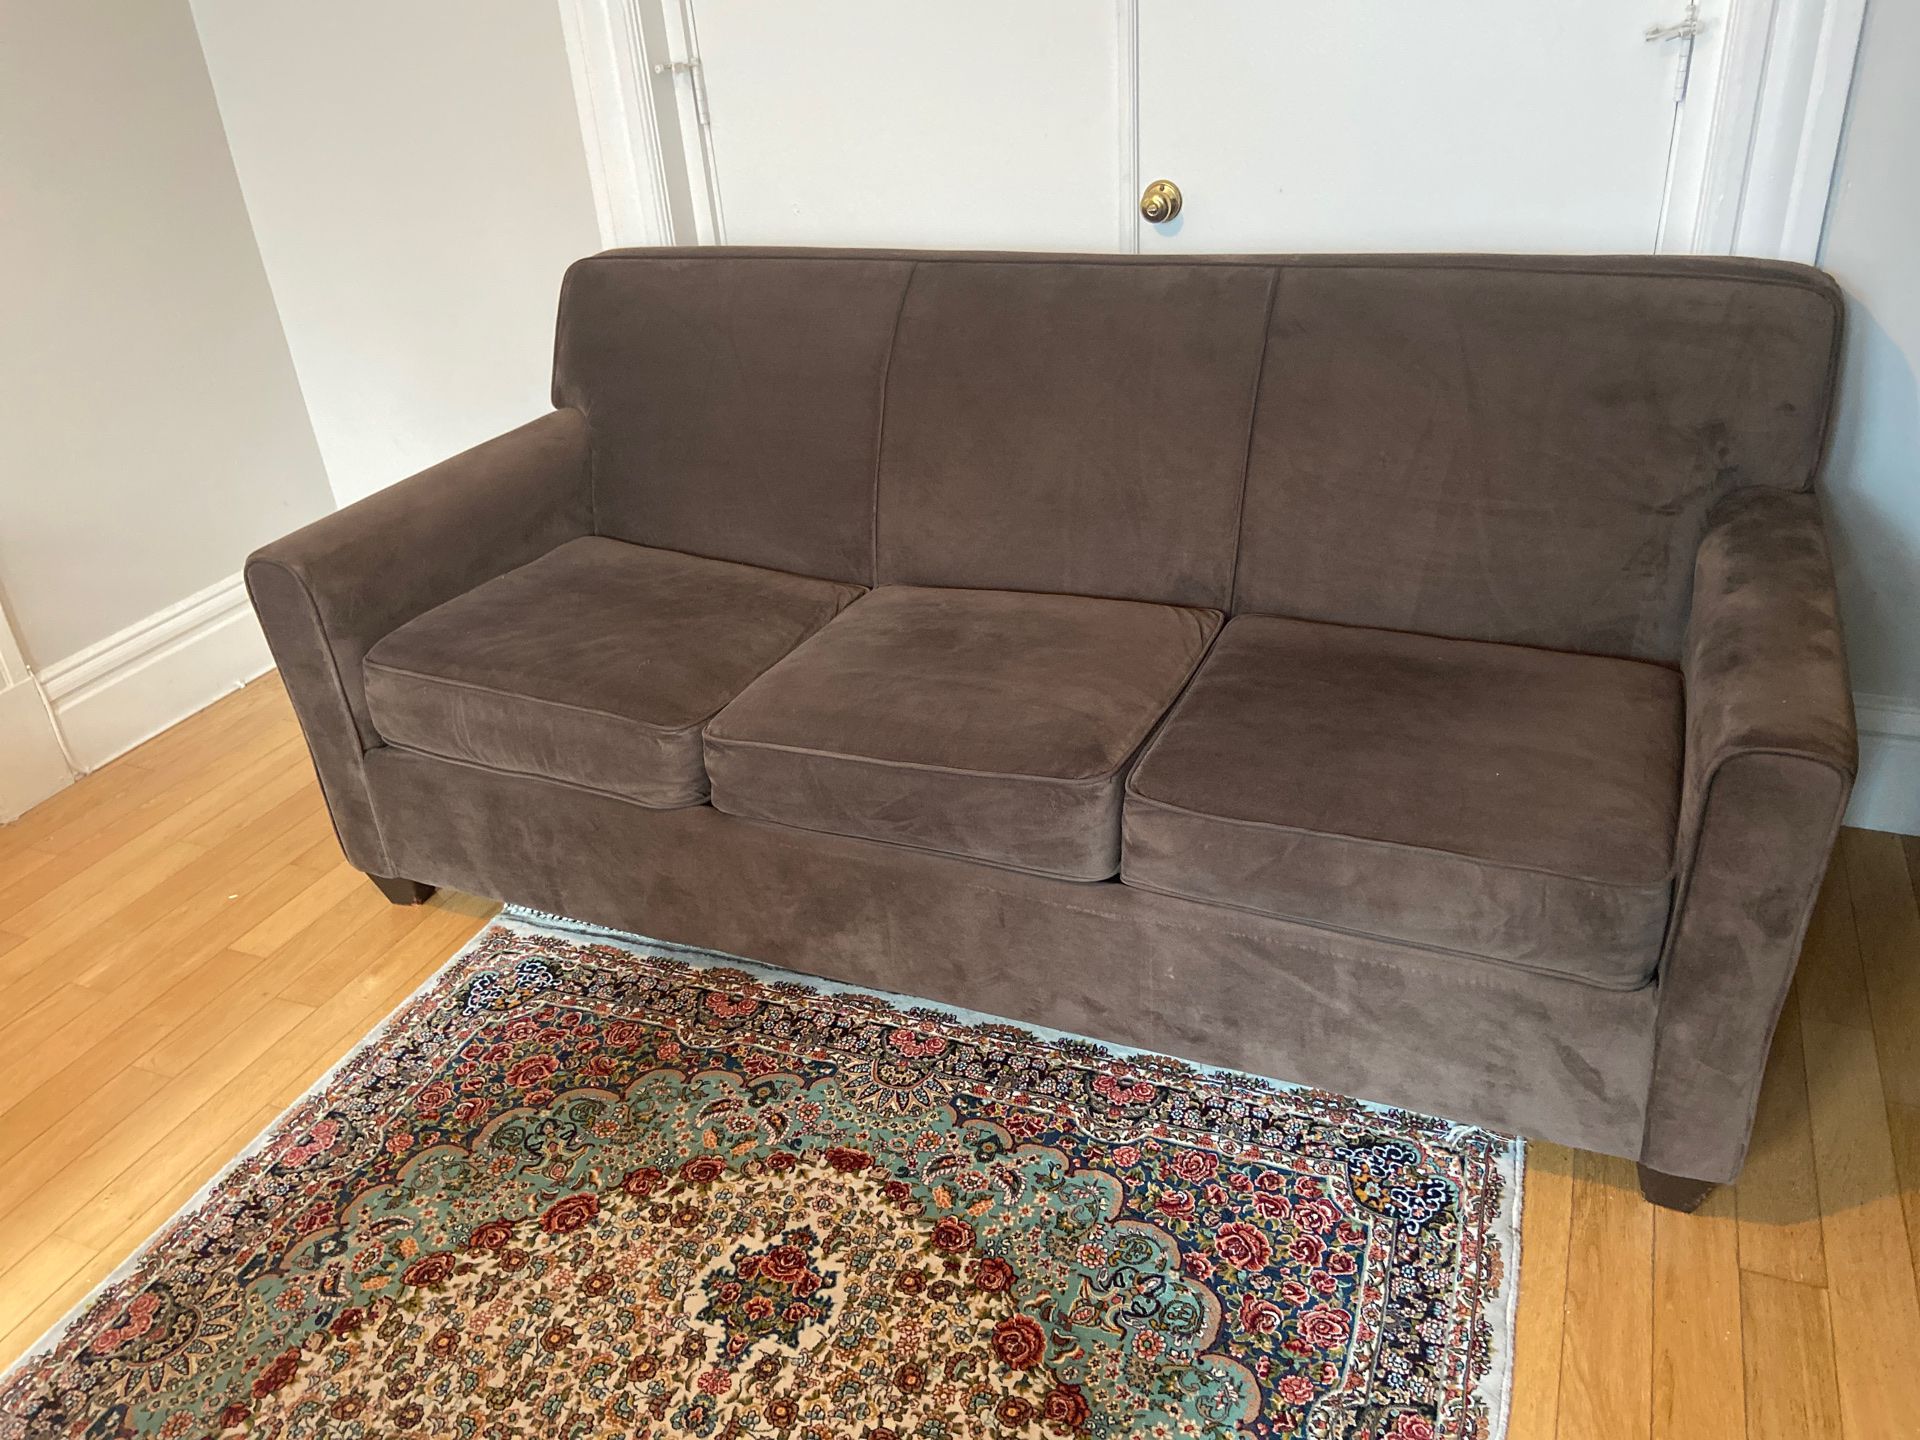 NAME YOUR PRICE: Like new plush brown sofa/couch